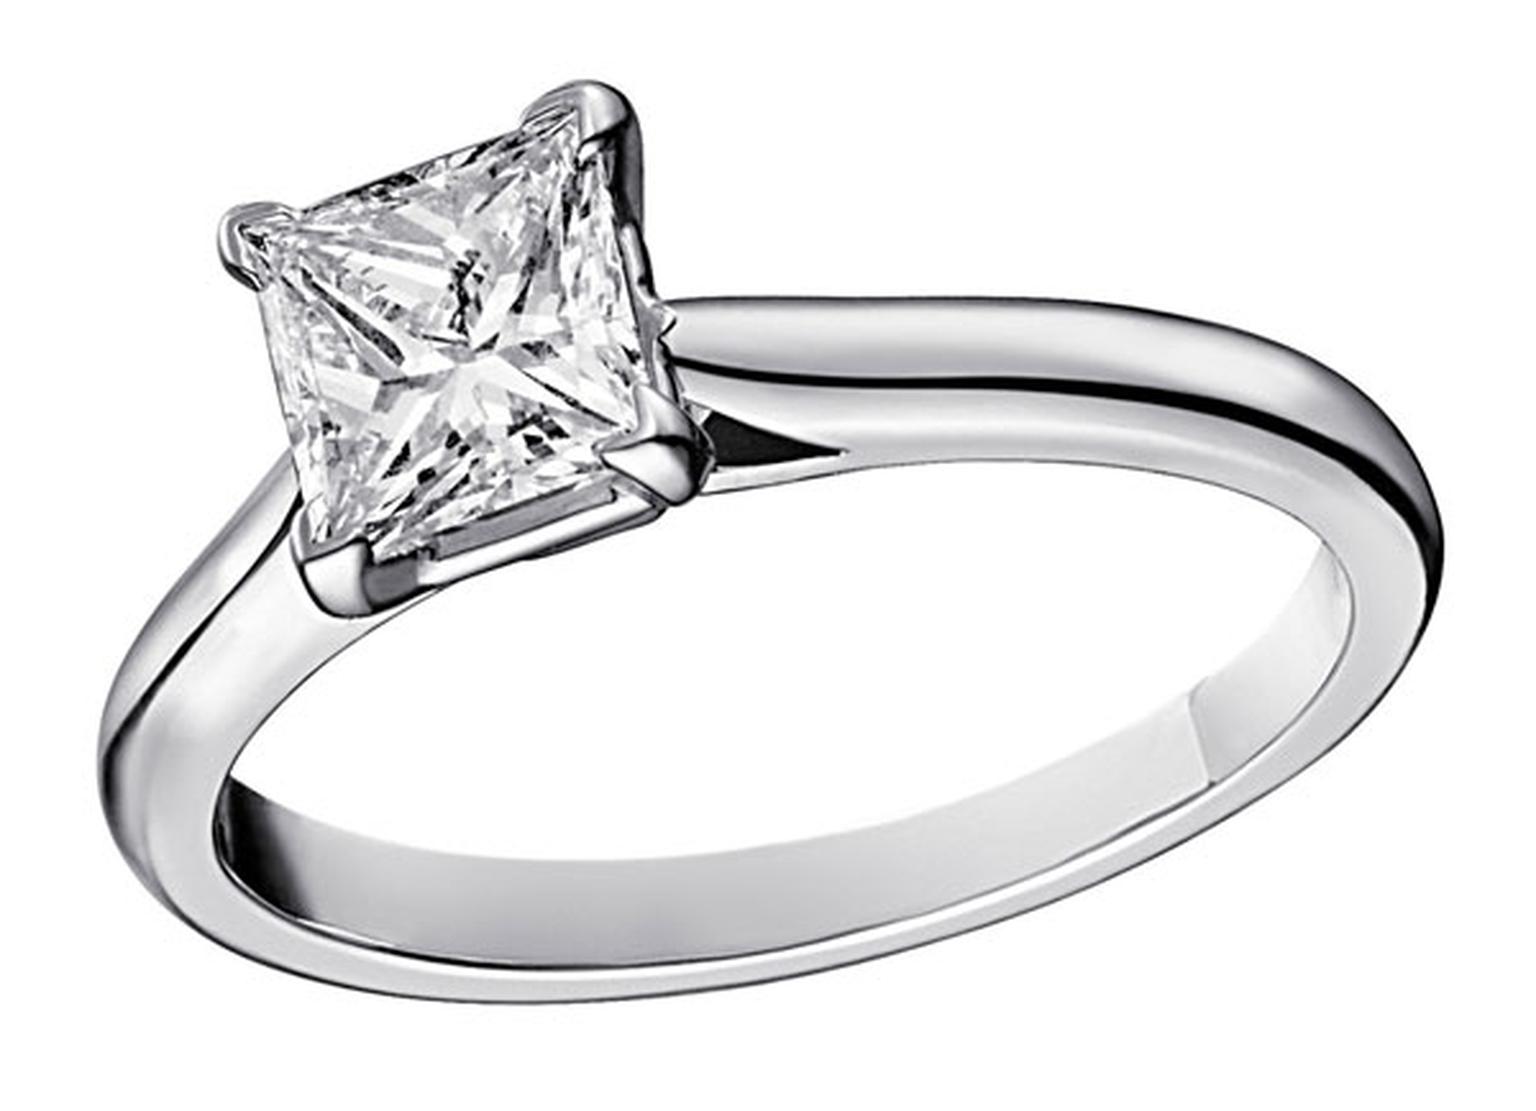 Cartier Solitaire 1895  diamond engagement ring set in platinum with a central princess-cut diamond.